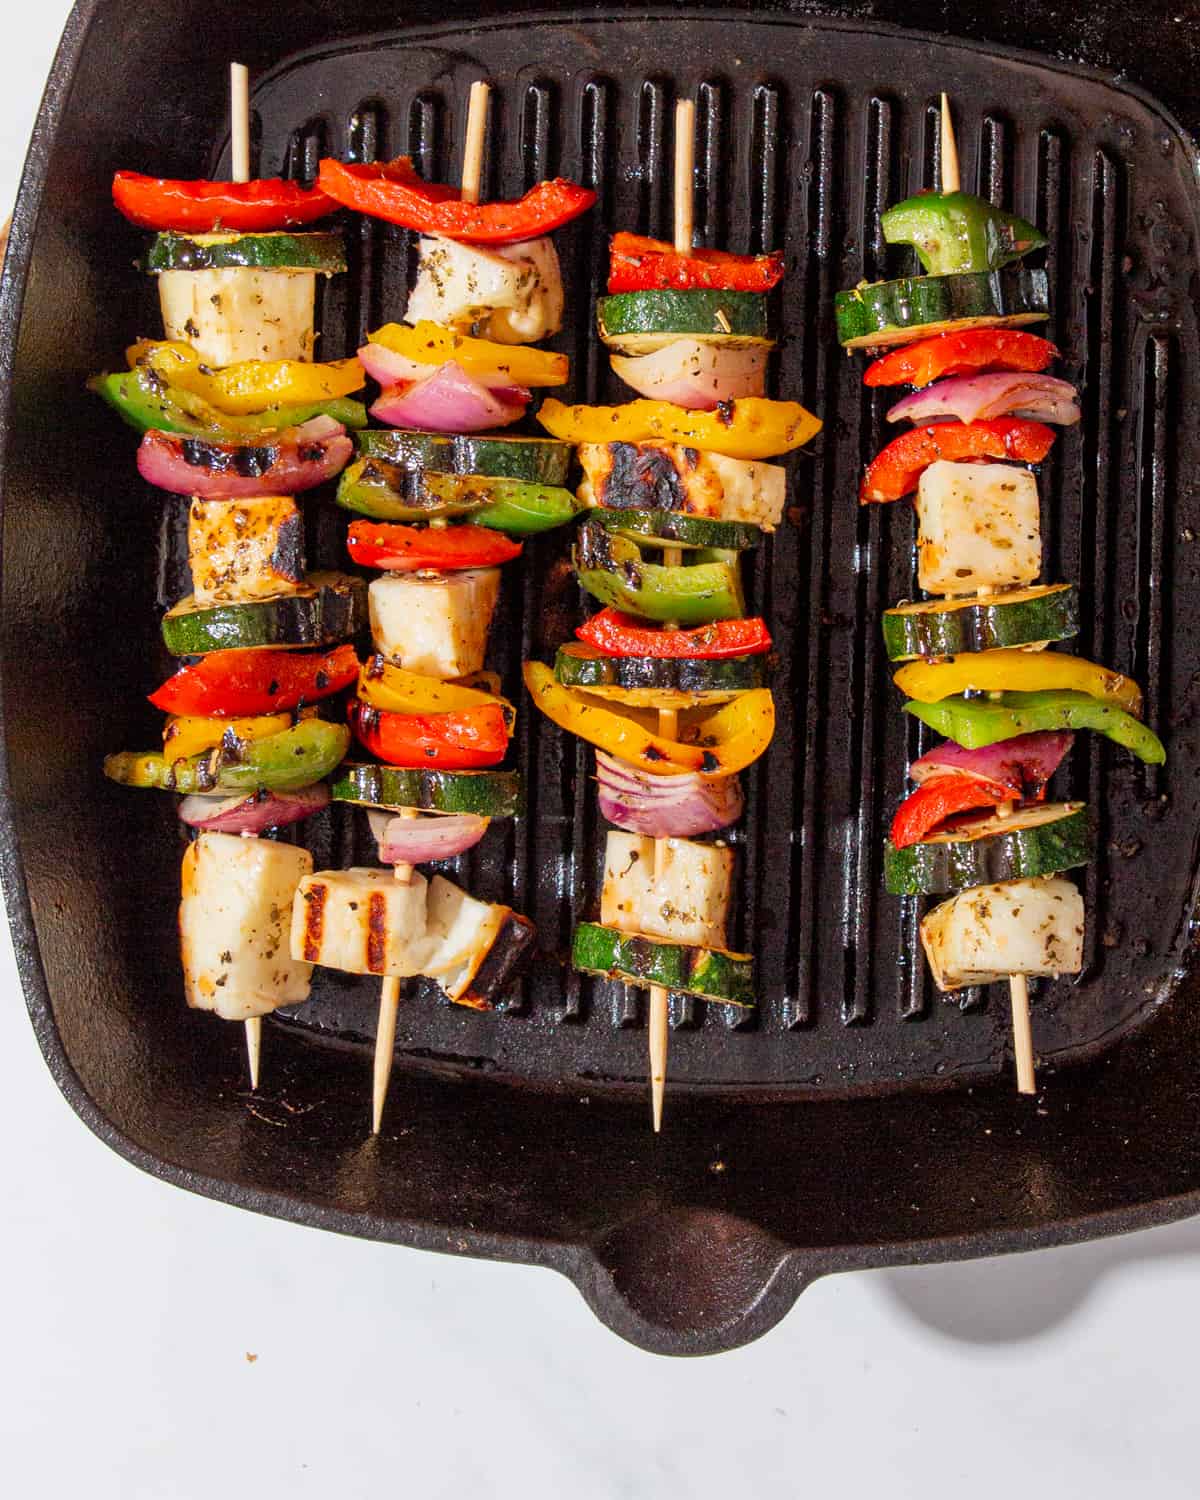 Halloumi and Vegetable Skewers Recipe